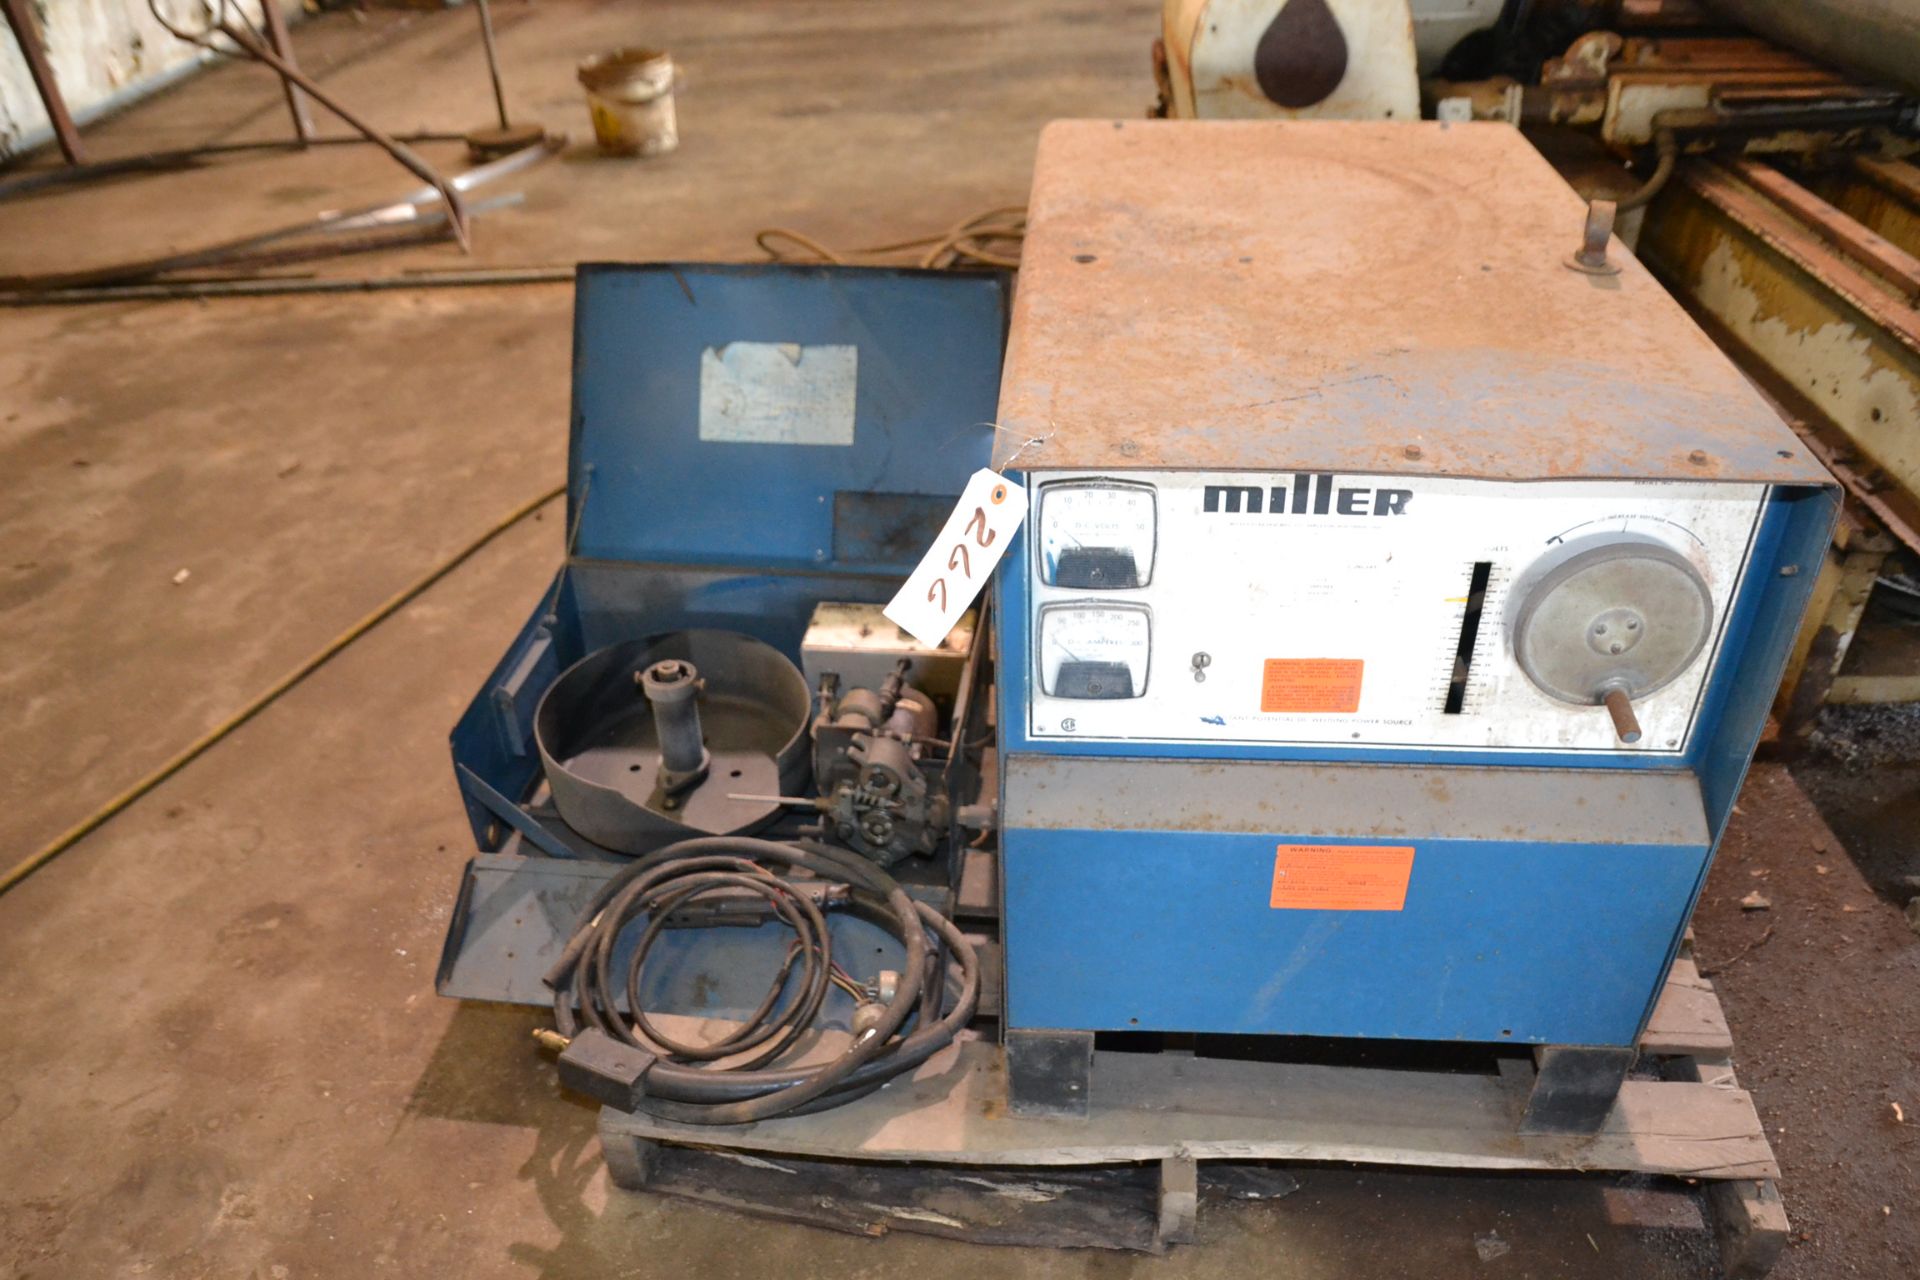 WELDING MACHINE, MILLER, MDL- CP 250TS, 25 D AMP S/N JA372978 AND WIRE FEEDER MILLERMATIC (NEEDS